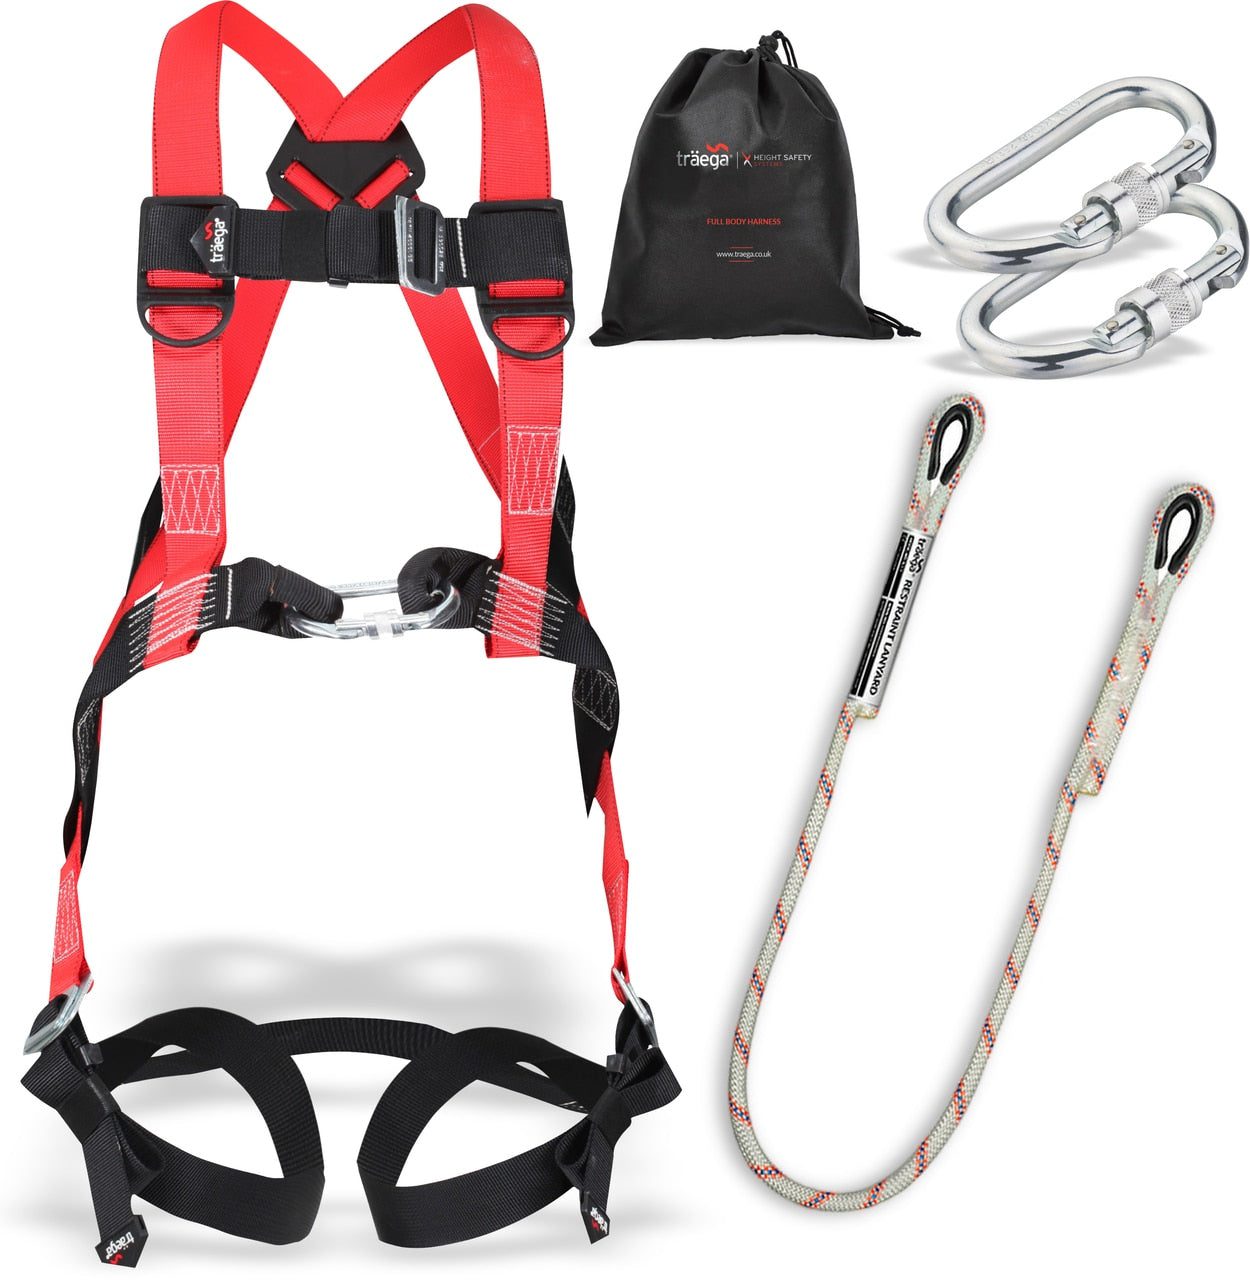 Safety Harness kit for Cherry picker working at height - Damar Webbing Solutions Ltd